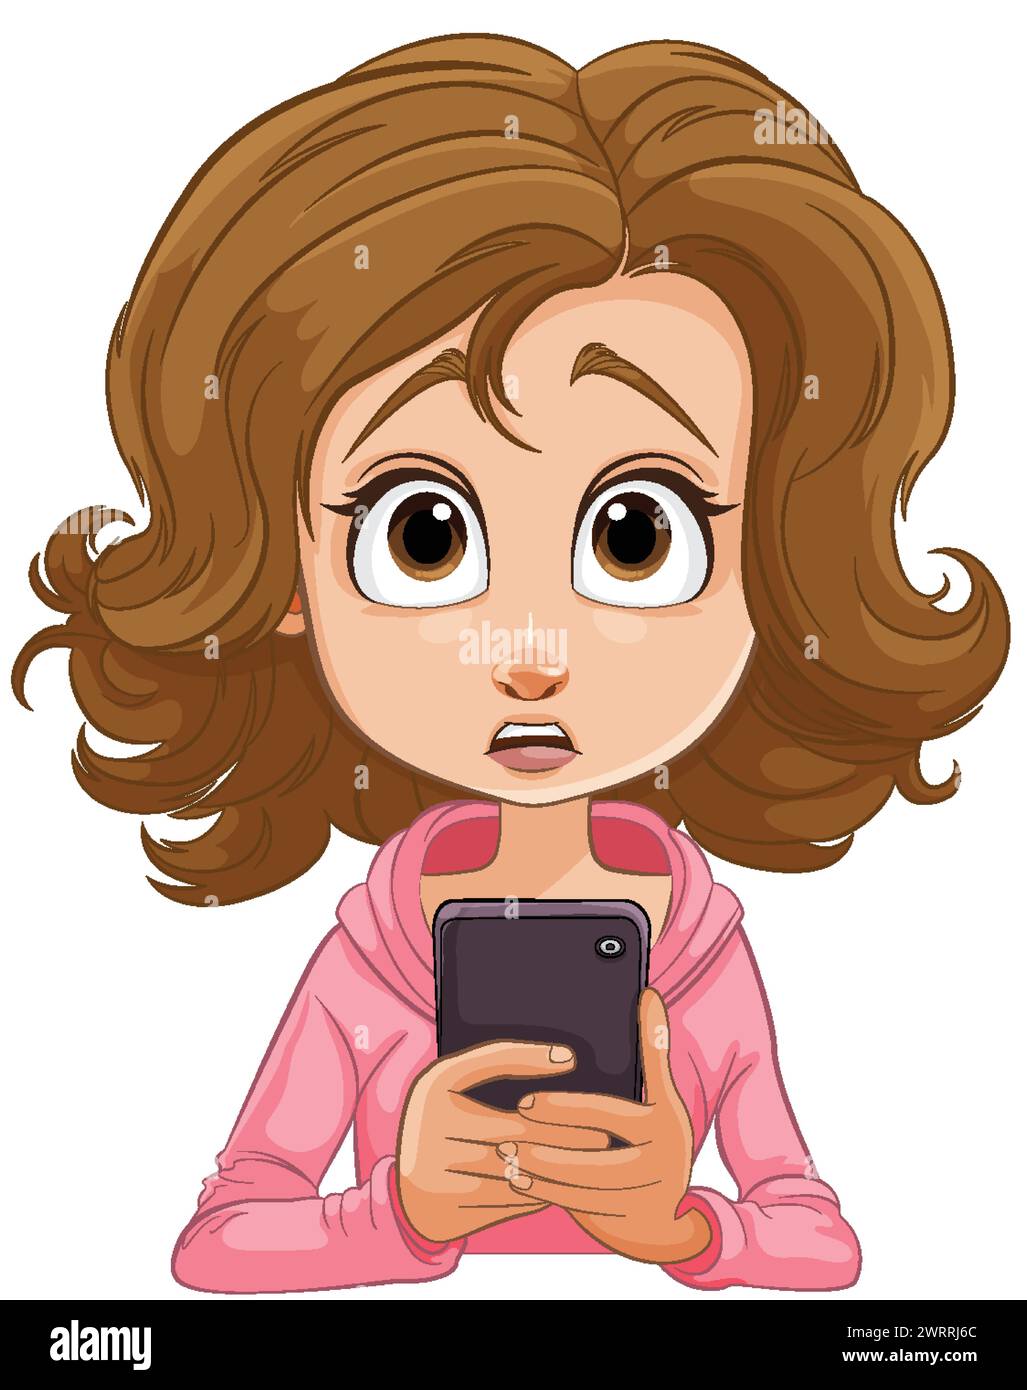 Cartoon of a girl shocked by her phone Stock Vector